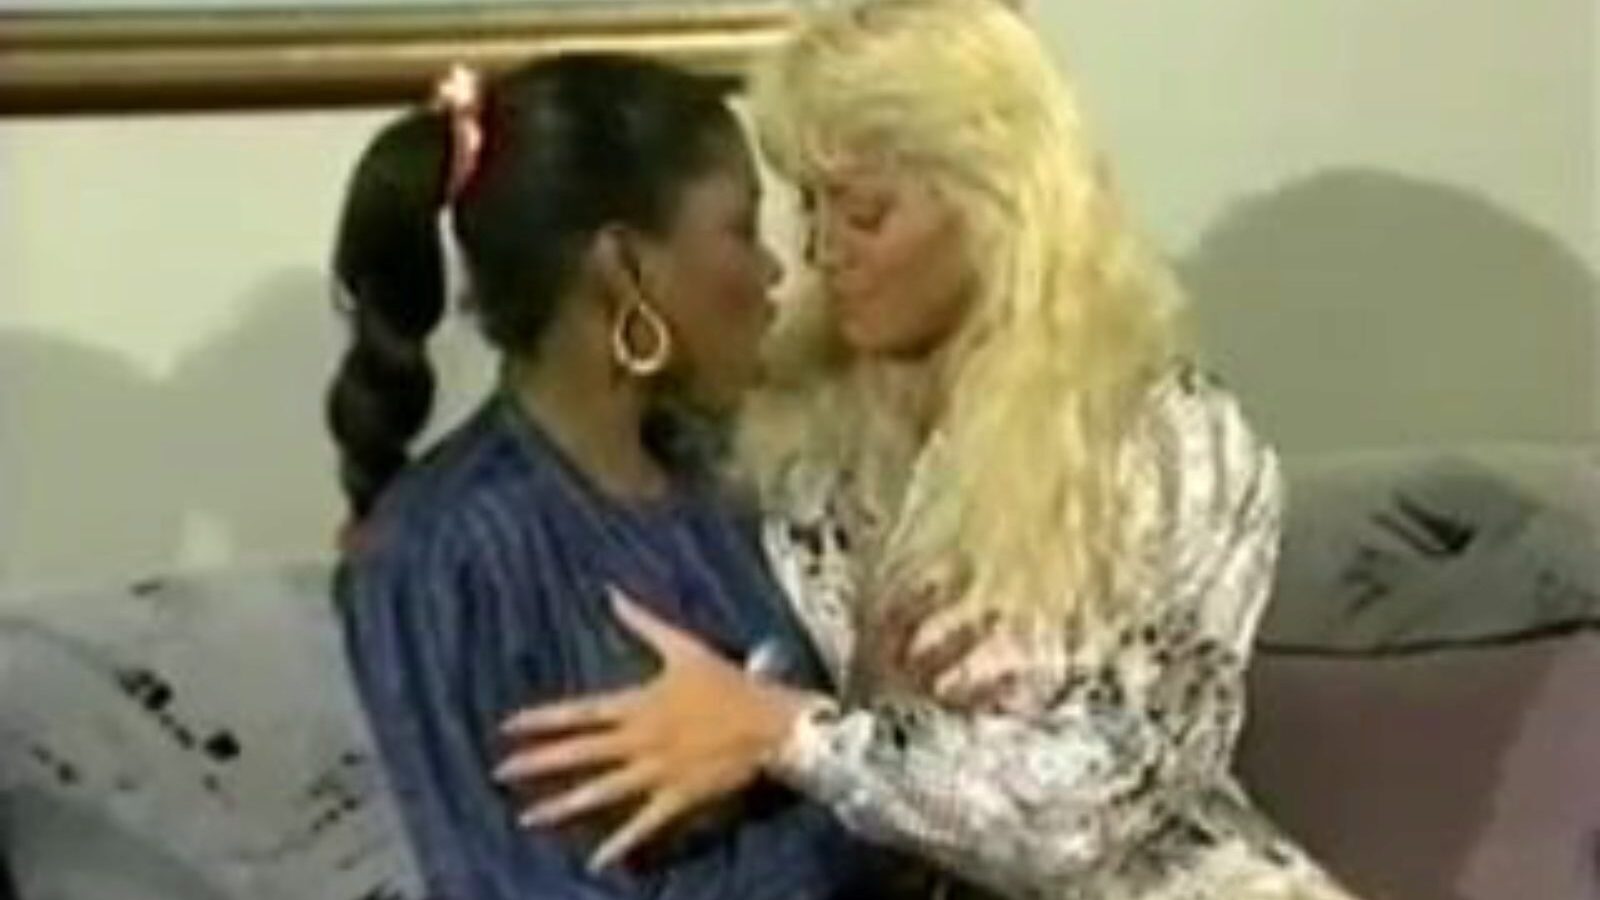 Beverlee and Ebony: Free Dirty Talking Lesbian Porn Video 2e Watch Beverlee and Ebony tube lovemaking video for free-for-all on xHamster, with the sexiest collection of Dirty Talking Lesbian Bearhug & Lesbian Sexfight porn clip scenes